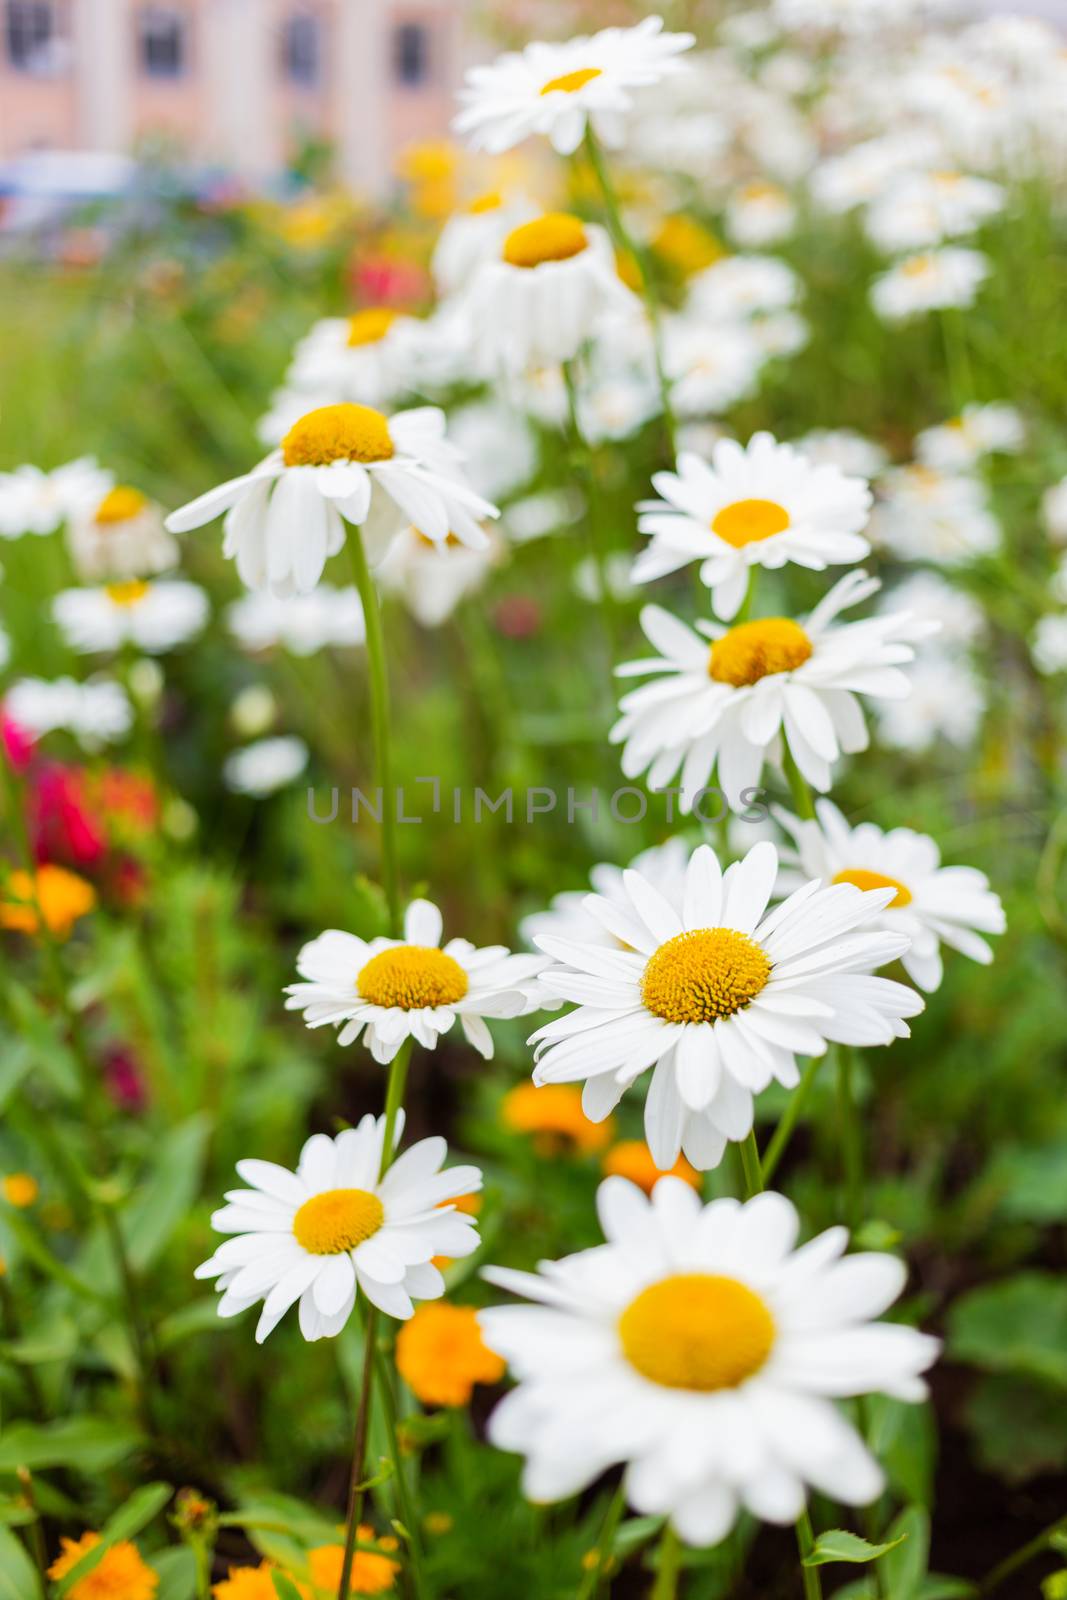 Lawn with blooming daisies. Flower bed in urban environment. Moscow, Russia.